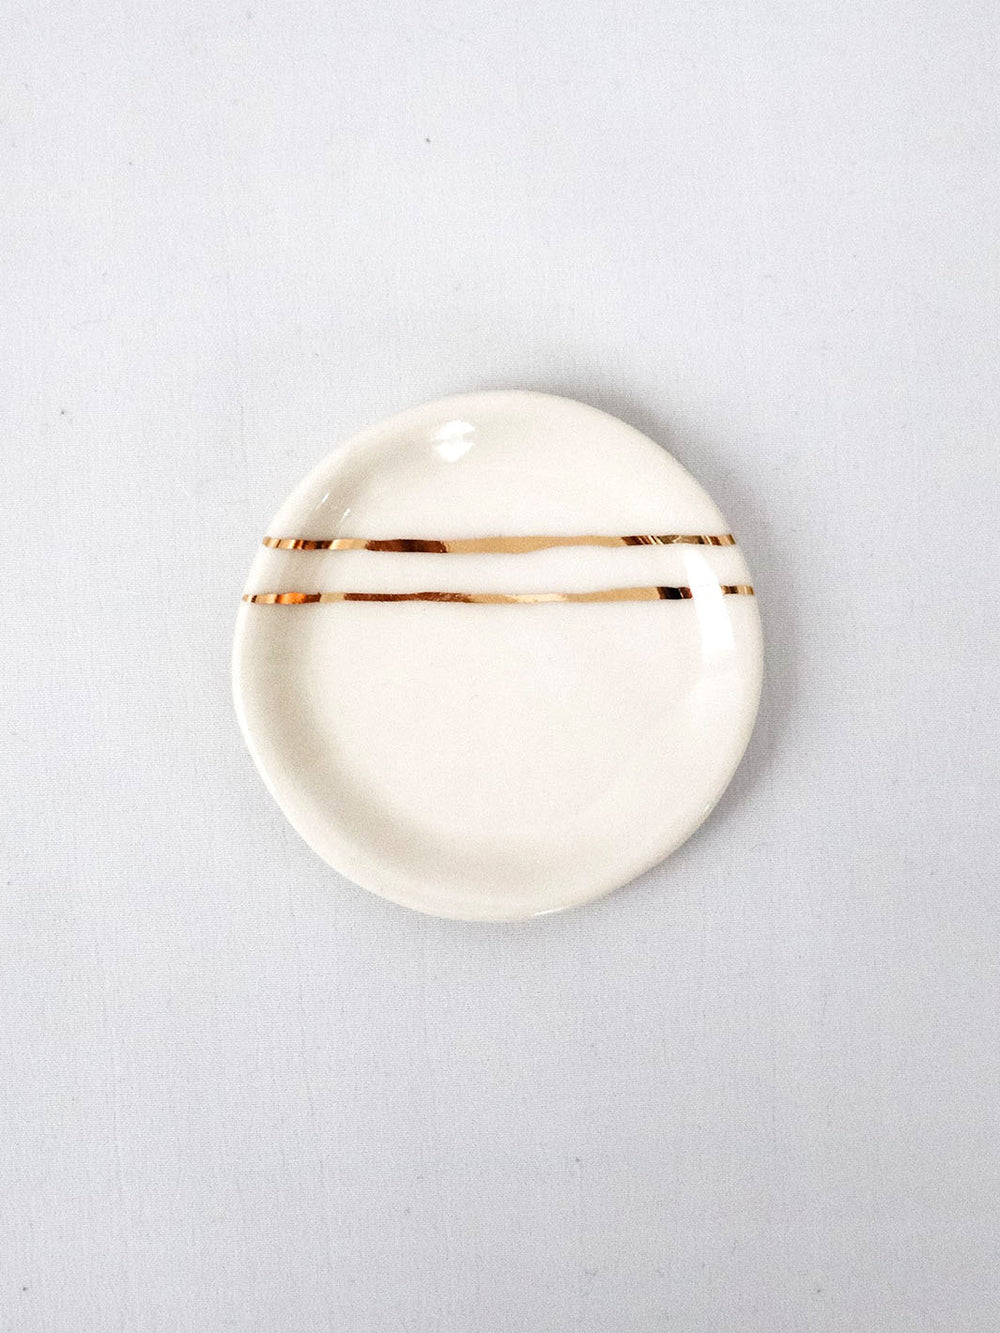 Gold Striped White Porcelain Dish Earthly Comfort Home Decor 750-1